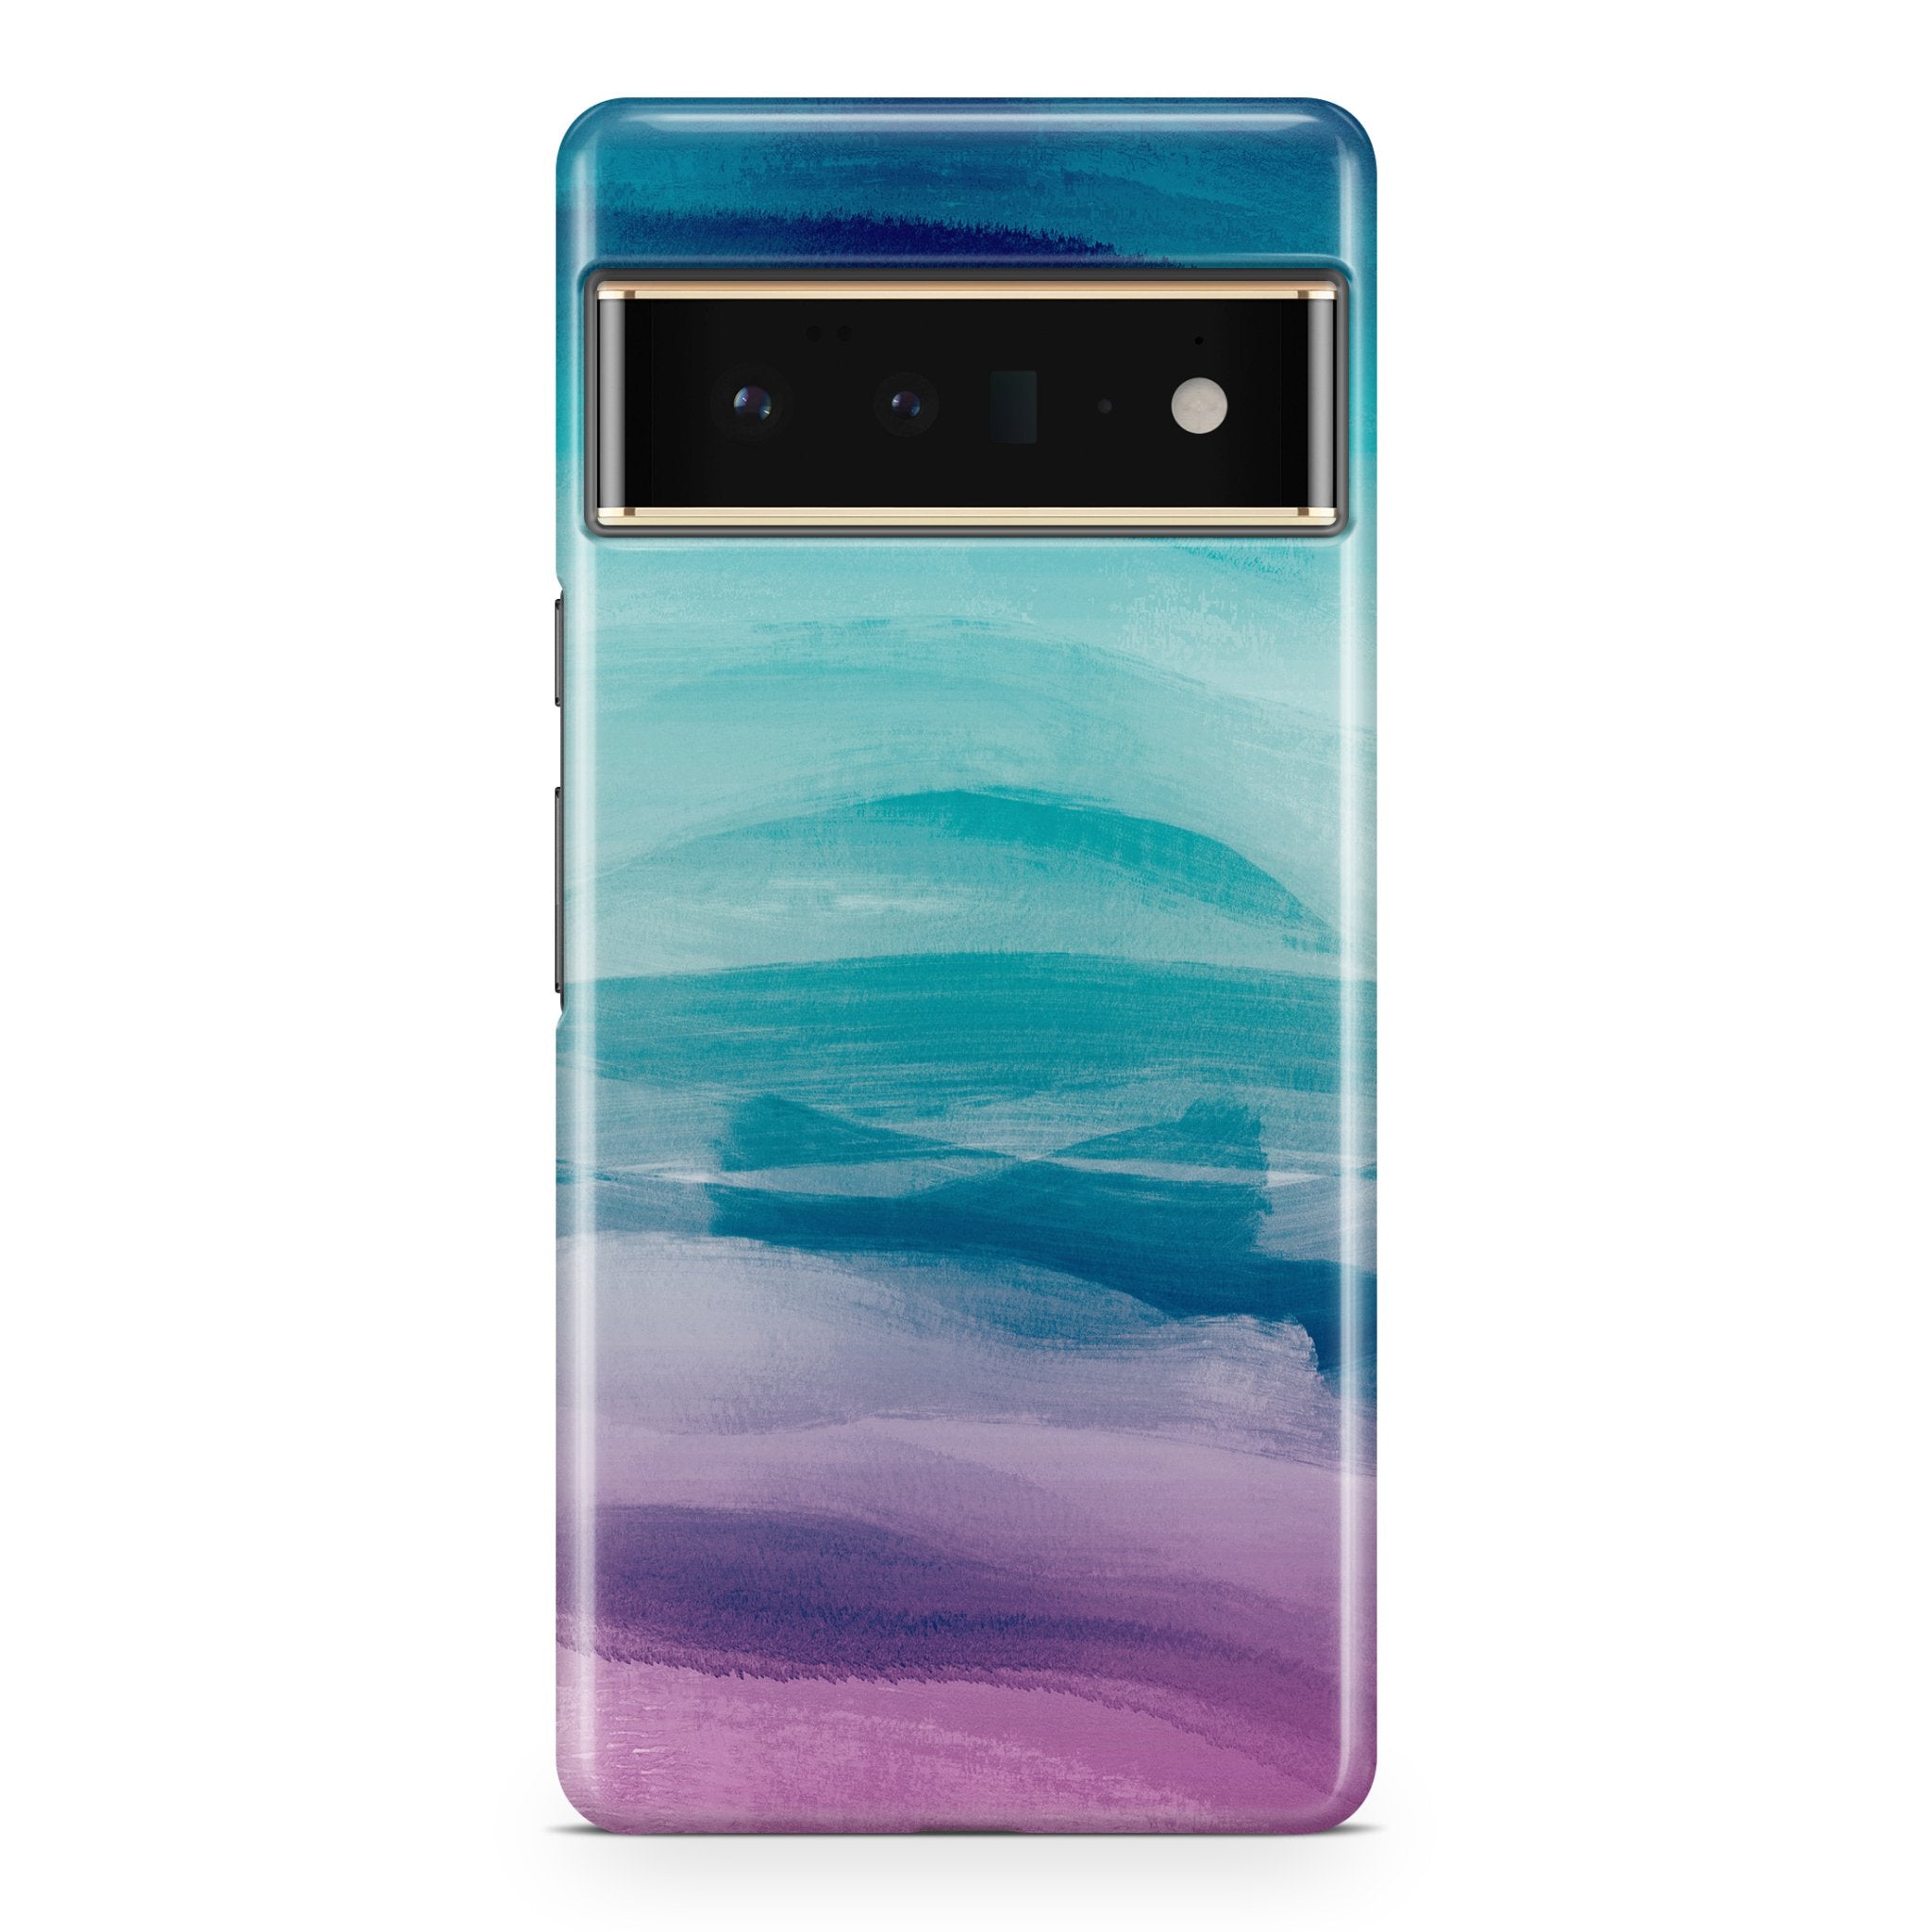 Into the Night Ombre - Google phone case designs by CaseSwagger